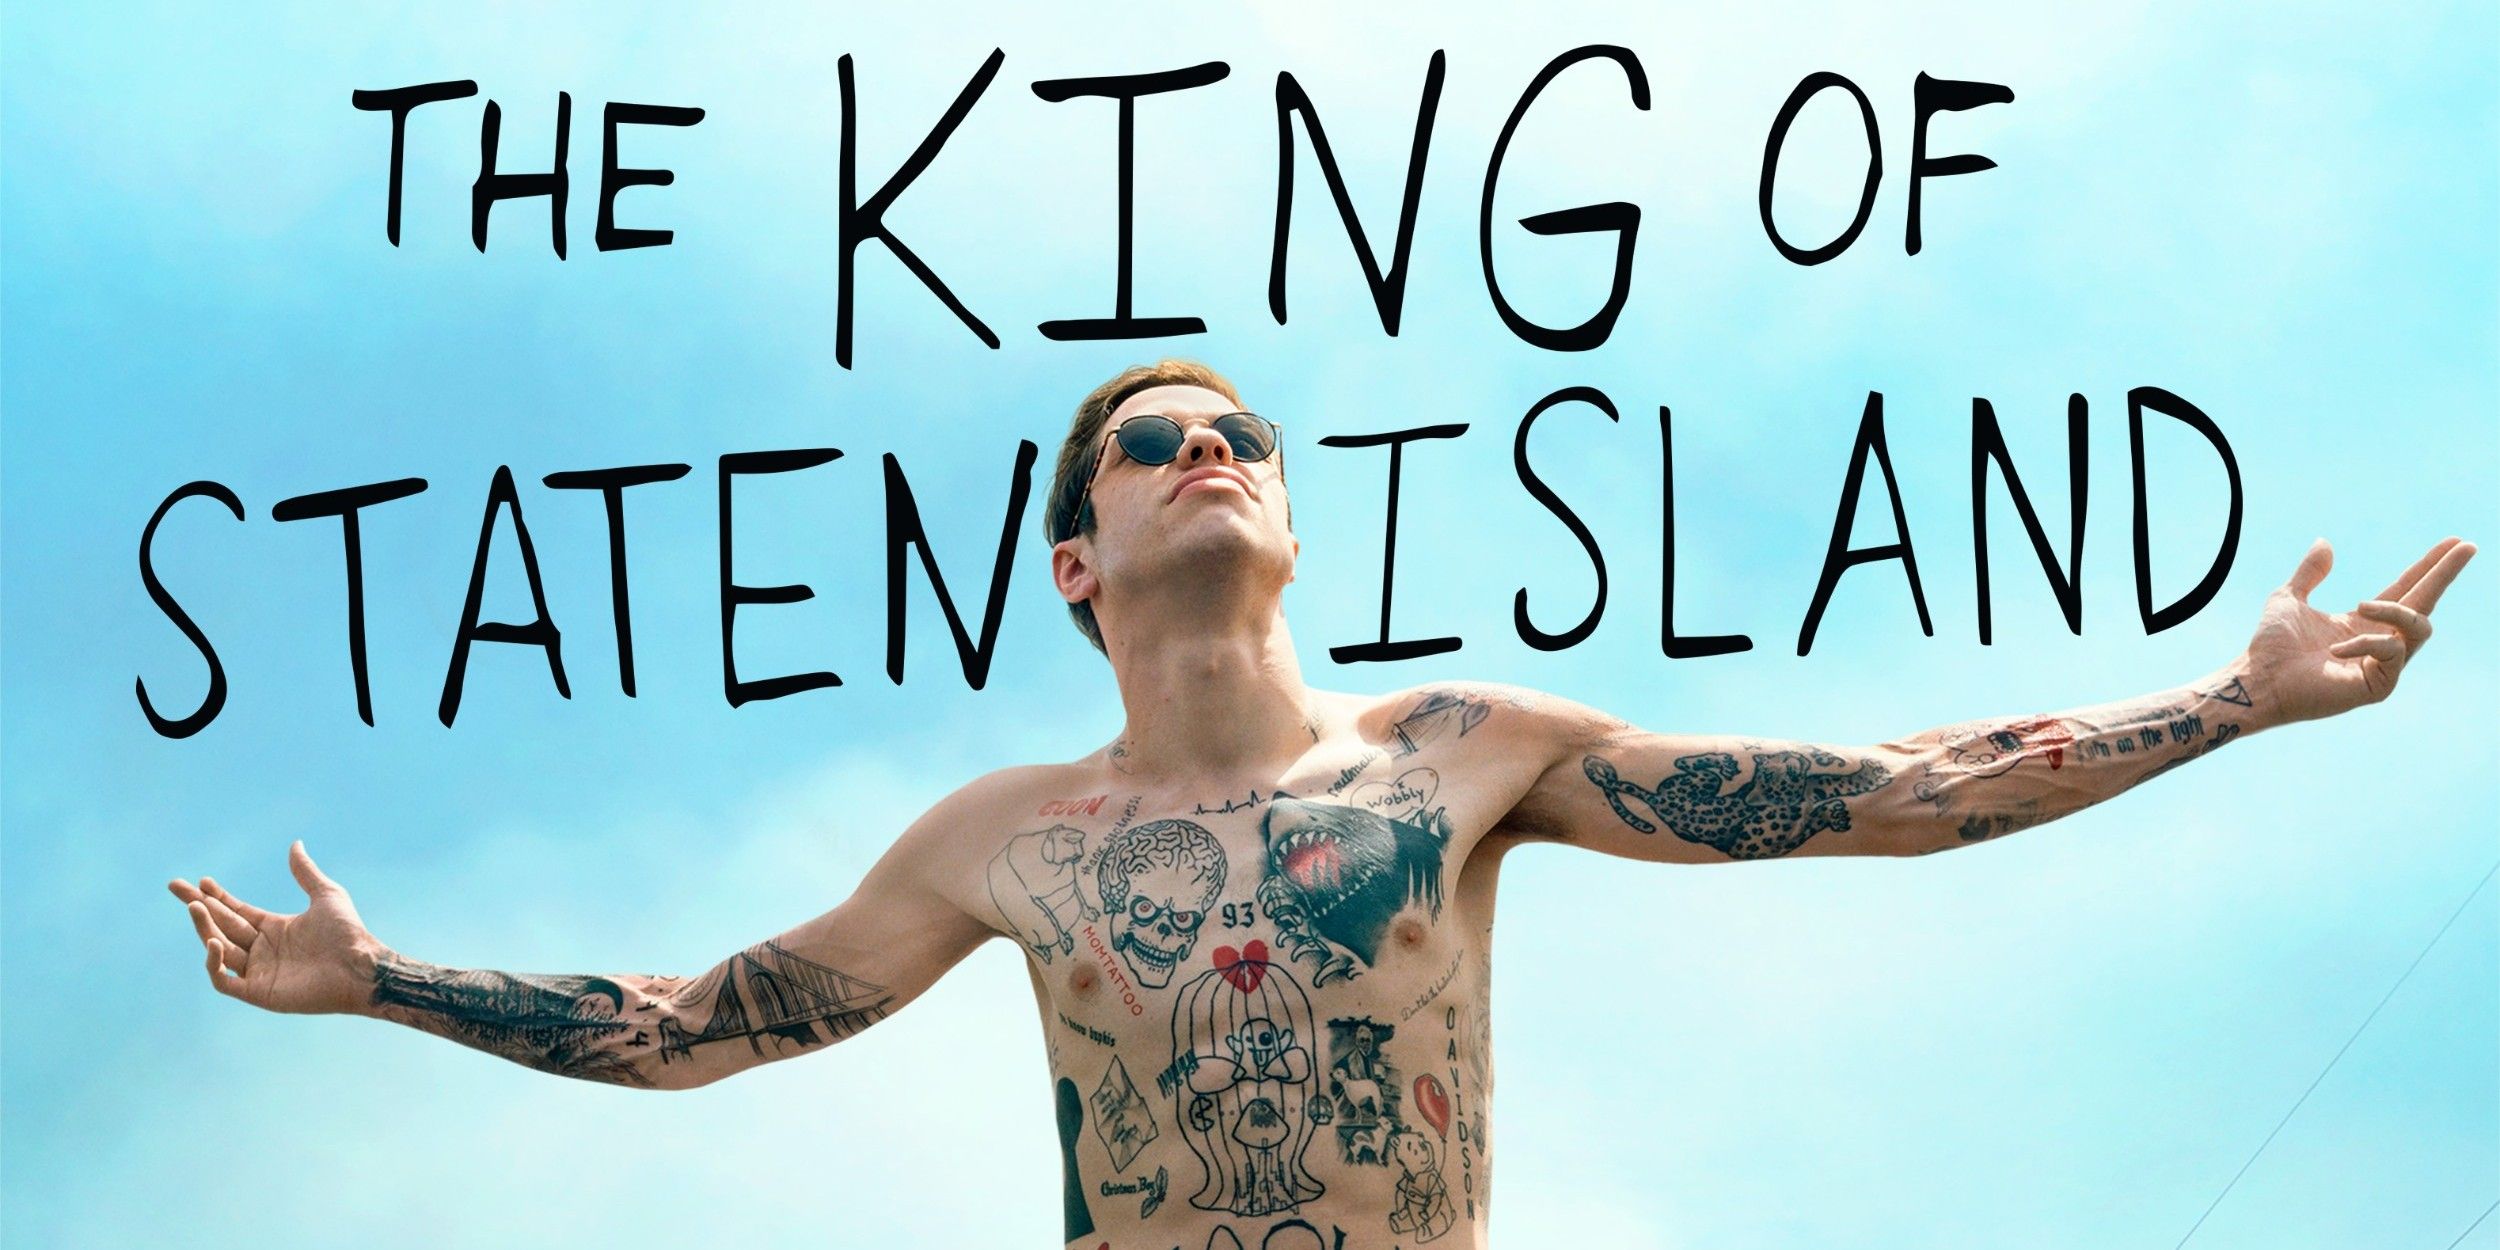 The-King-of-Staten-Island-Poster-Header-with-Pete-Davidson.jpg